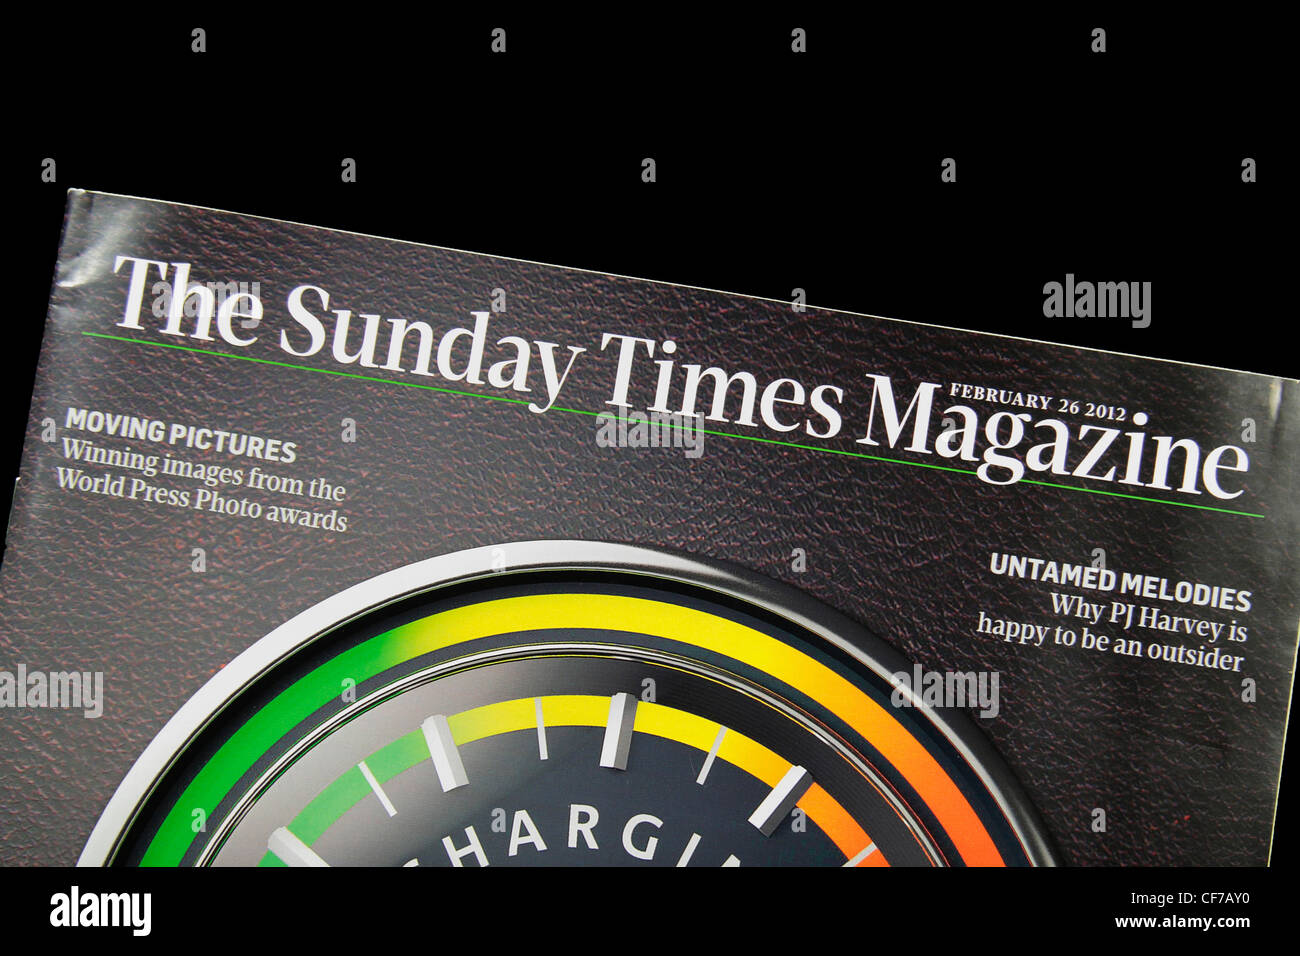 The banner headline of The Sunday Times Magazine, part of the Sunday Times national Sunday newspaper. (26th Feb 2012) Stock Photo